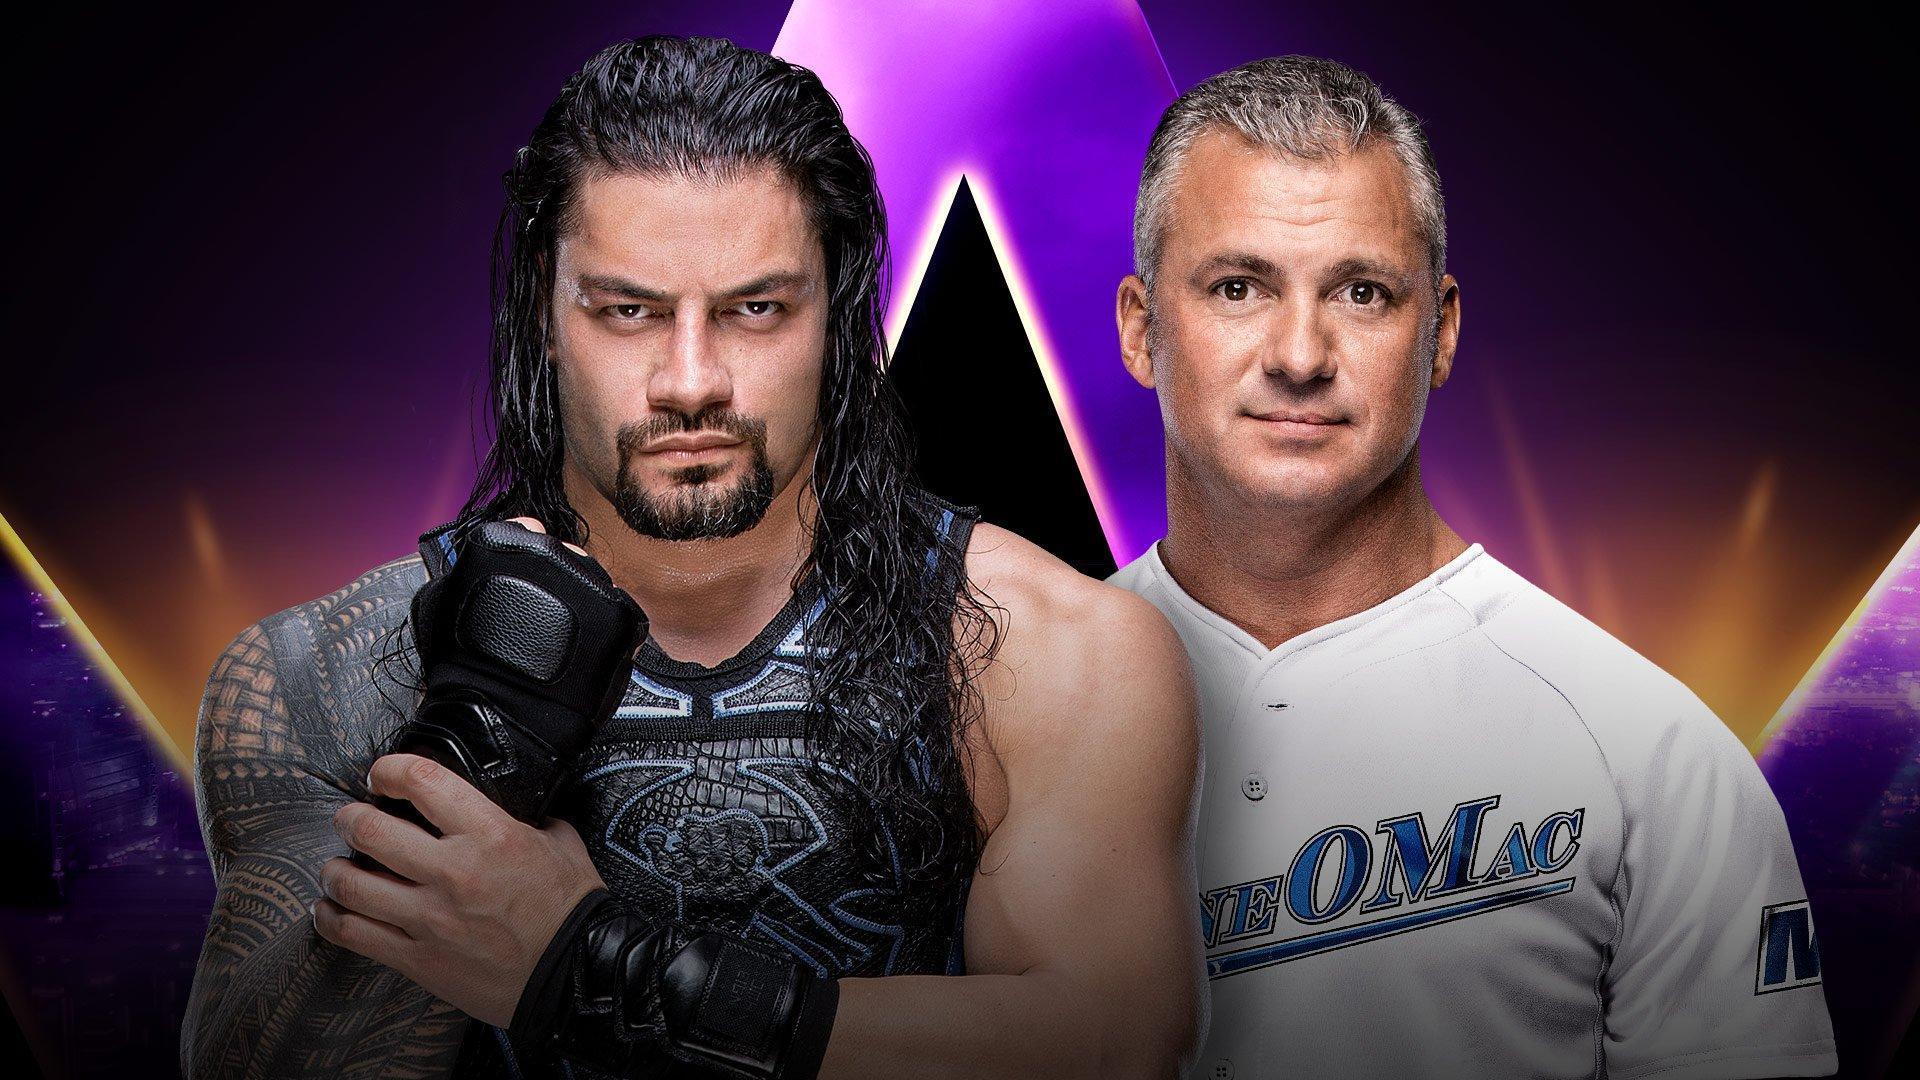 WWE Super ShowDown 2019: Picks for Every Match and Bold Predictions